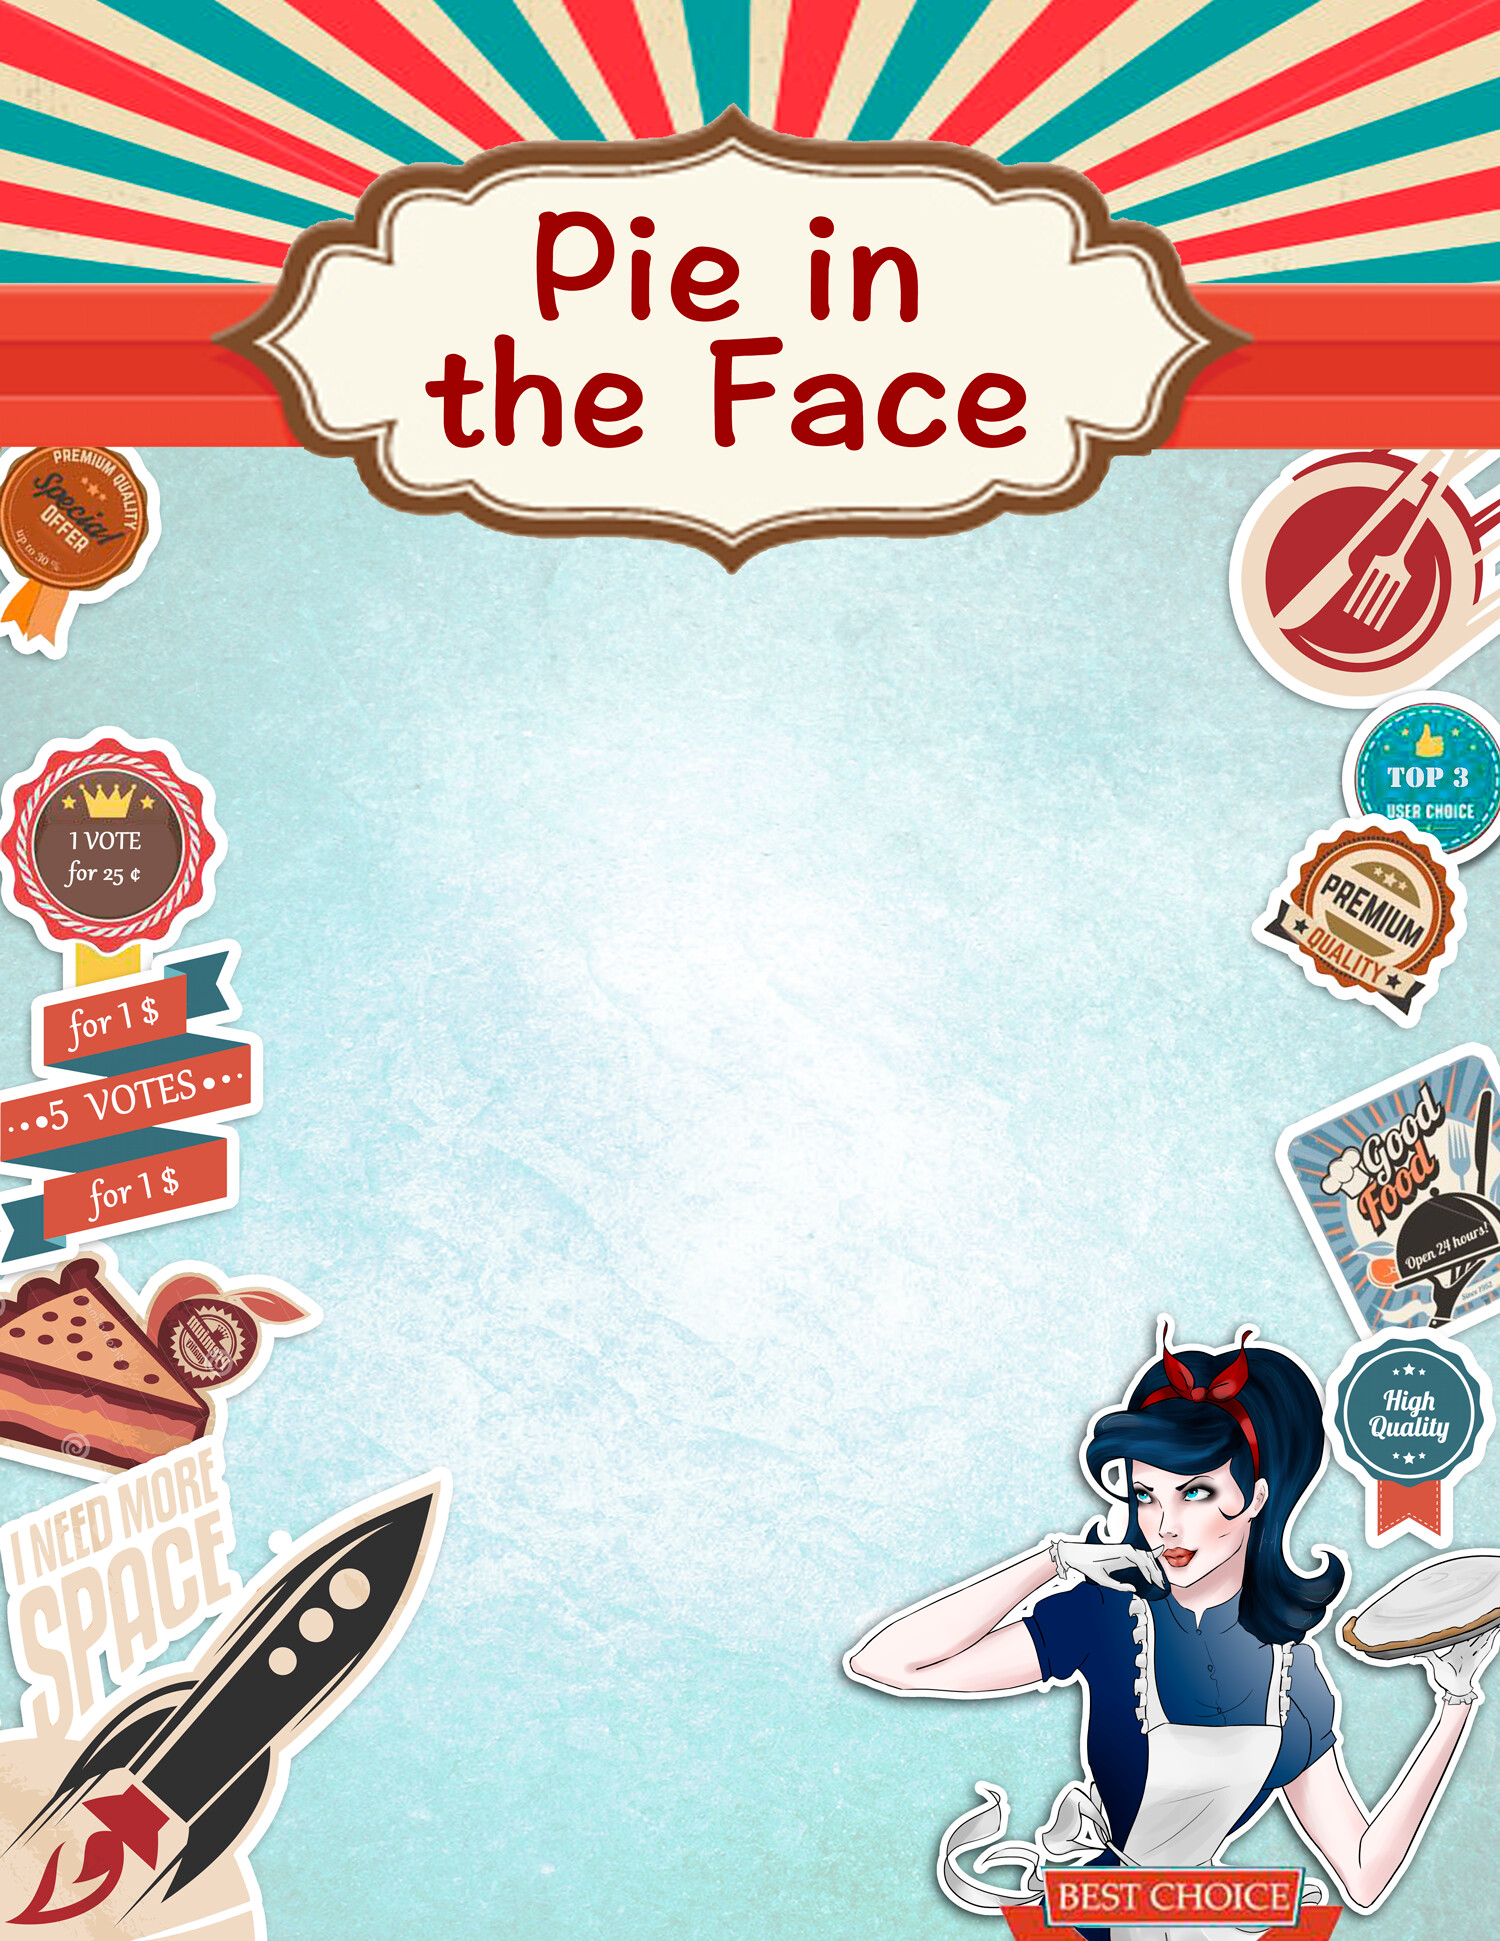 pie in the face fundraiser flyer